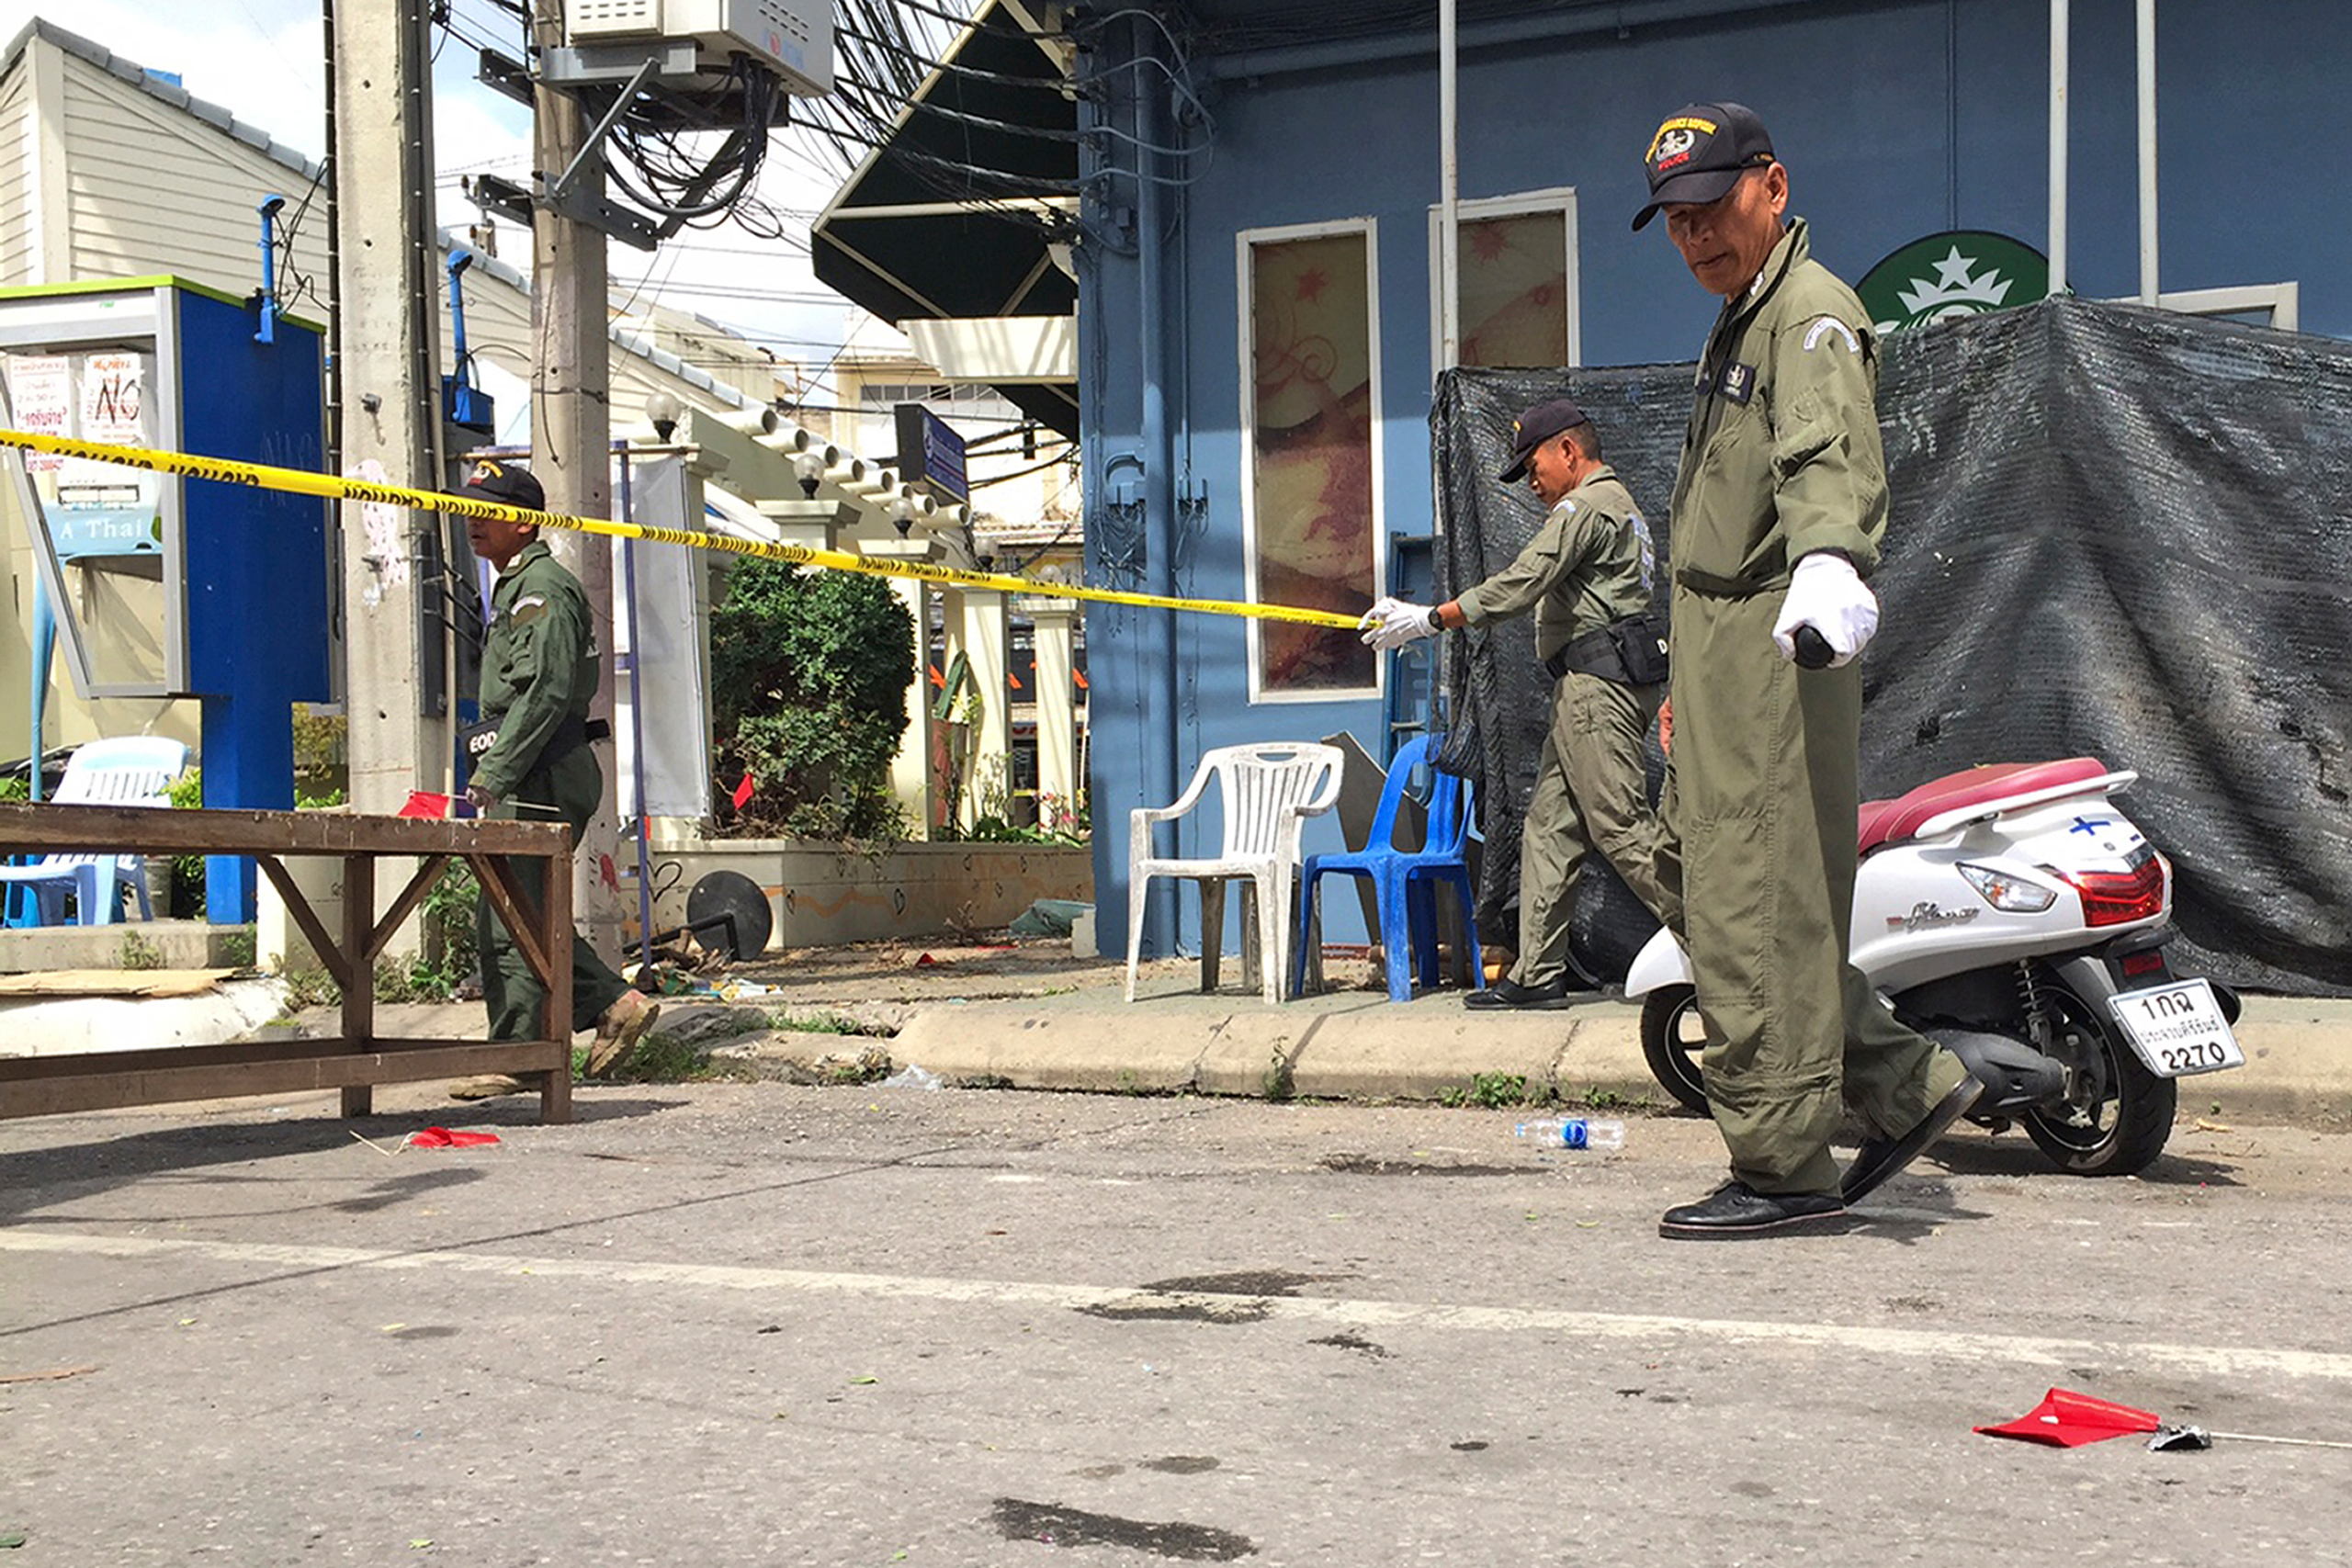 Investigators work at the scene of an explosion in the resort town of Hua Hin, 150 miles south of Bangkok, on Aug. 12, 2016. (Jerry Harmer—AP)